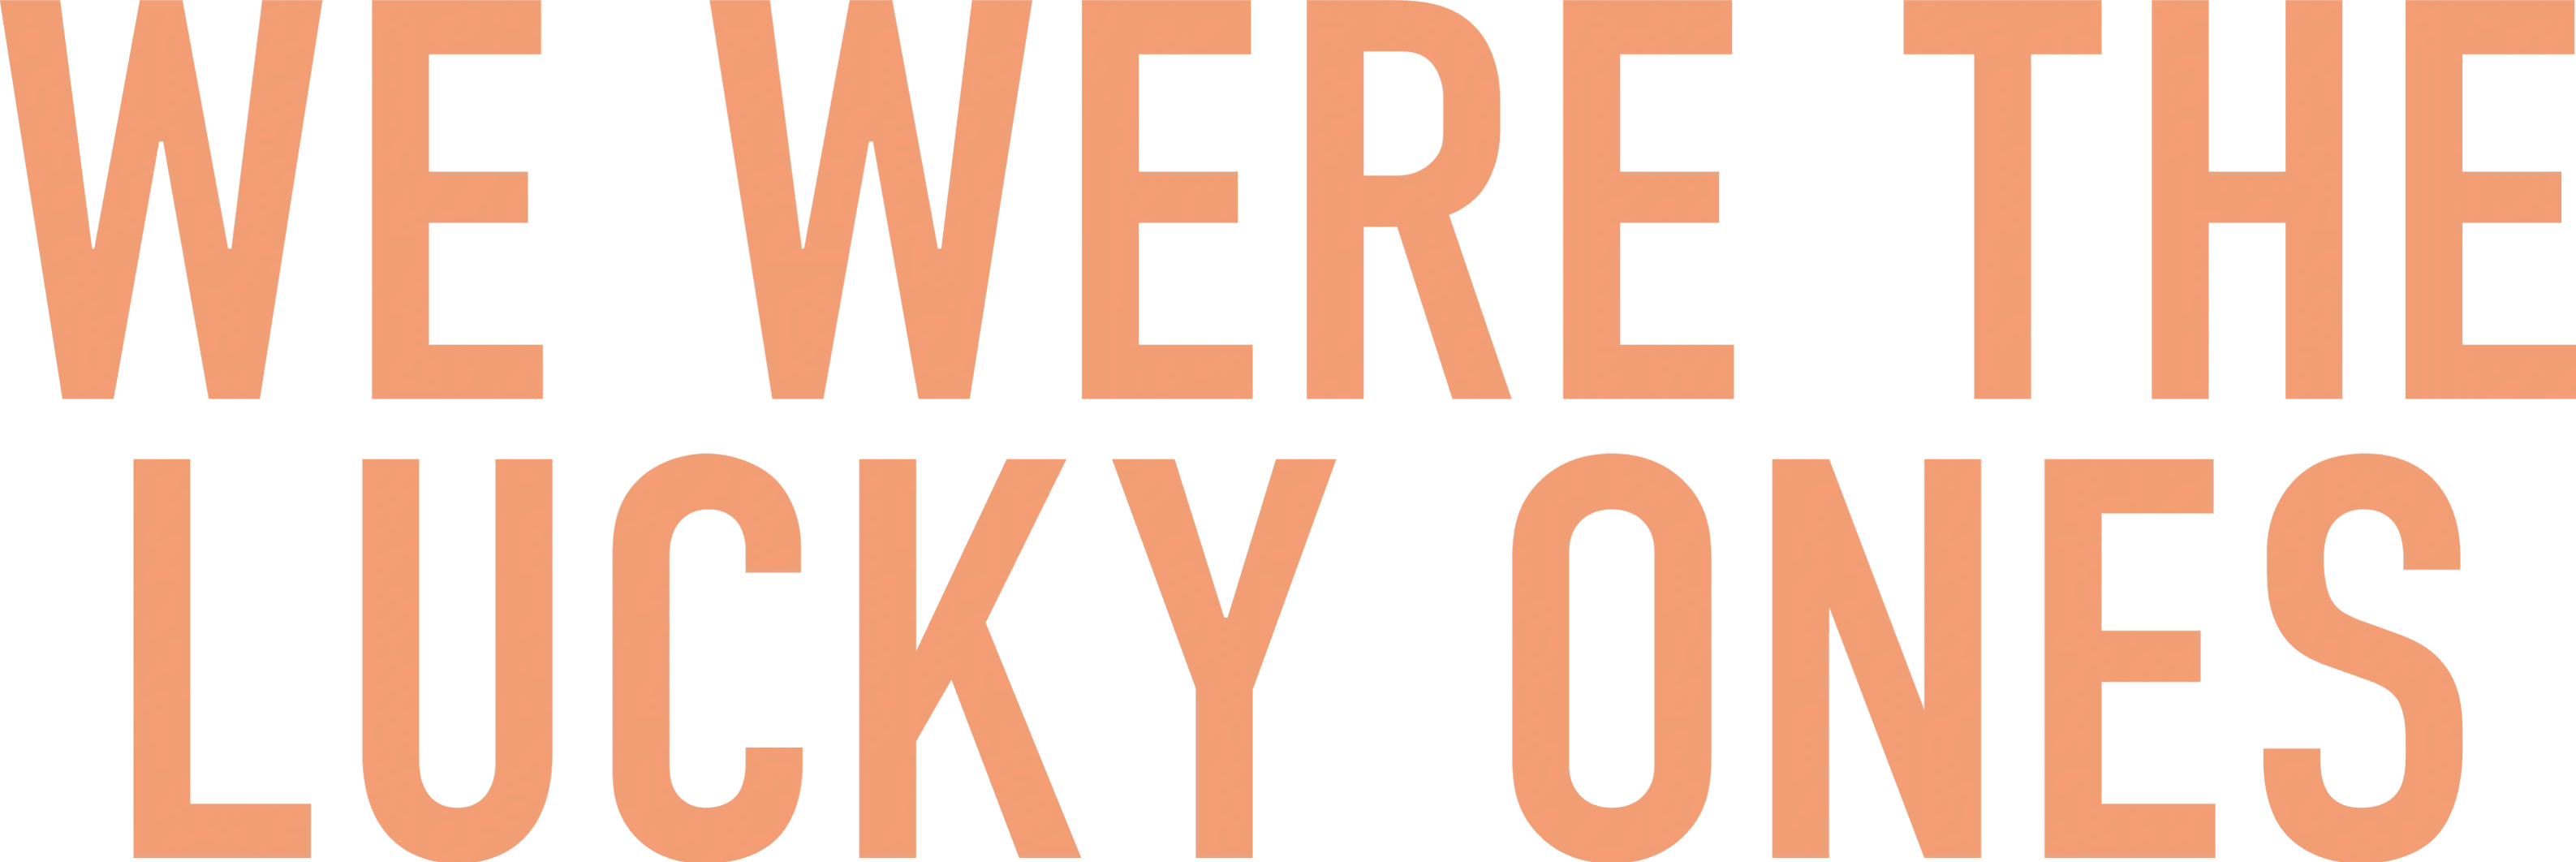 We Were the Lucky Ones logo